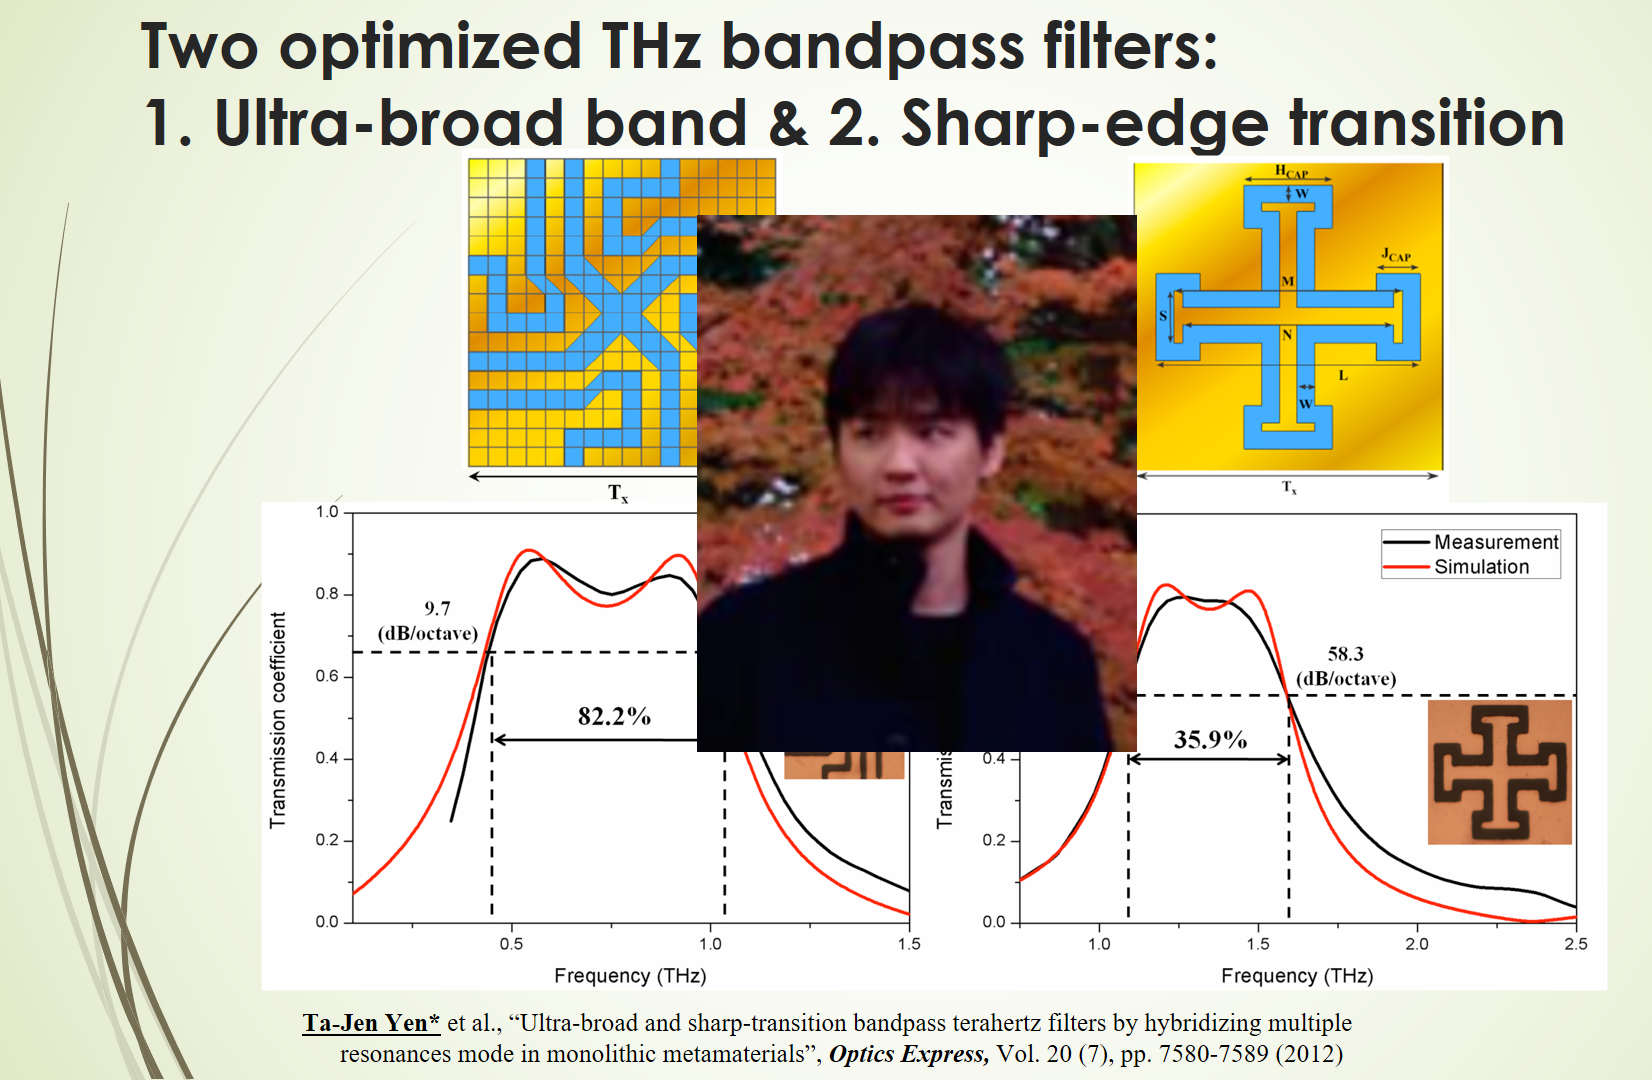 Two optimized THz bandpass filters: 1. Ultra-broad band & 2. Sharp-edge transition